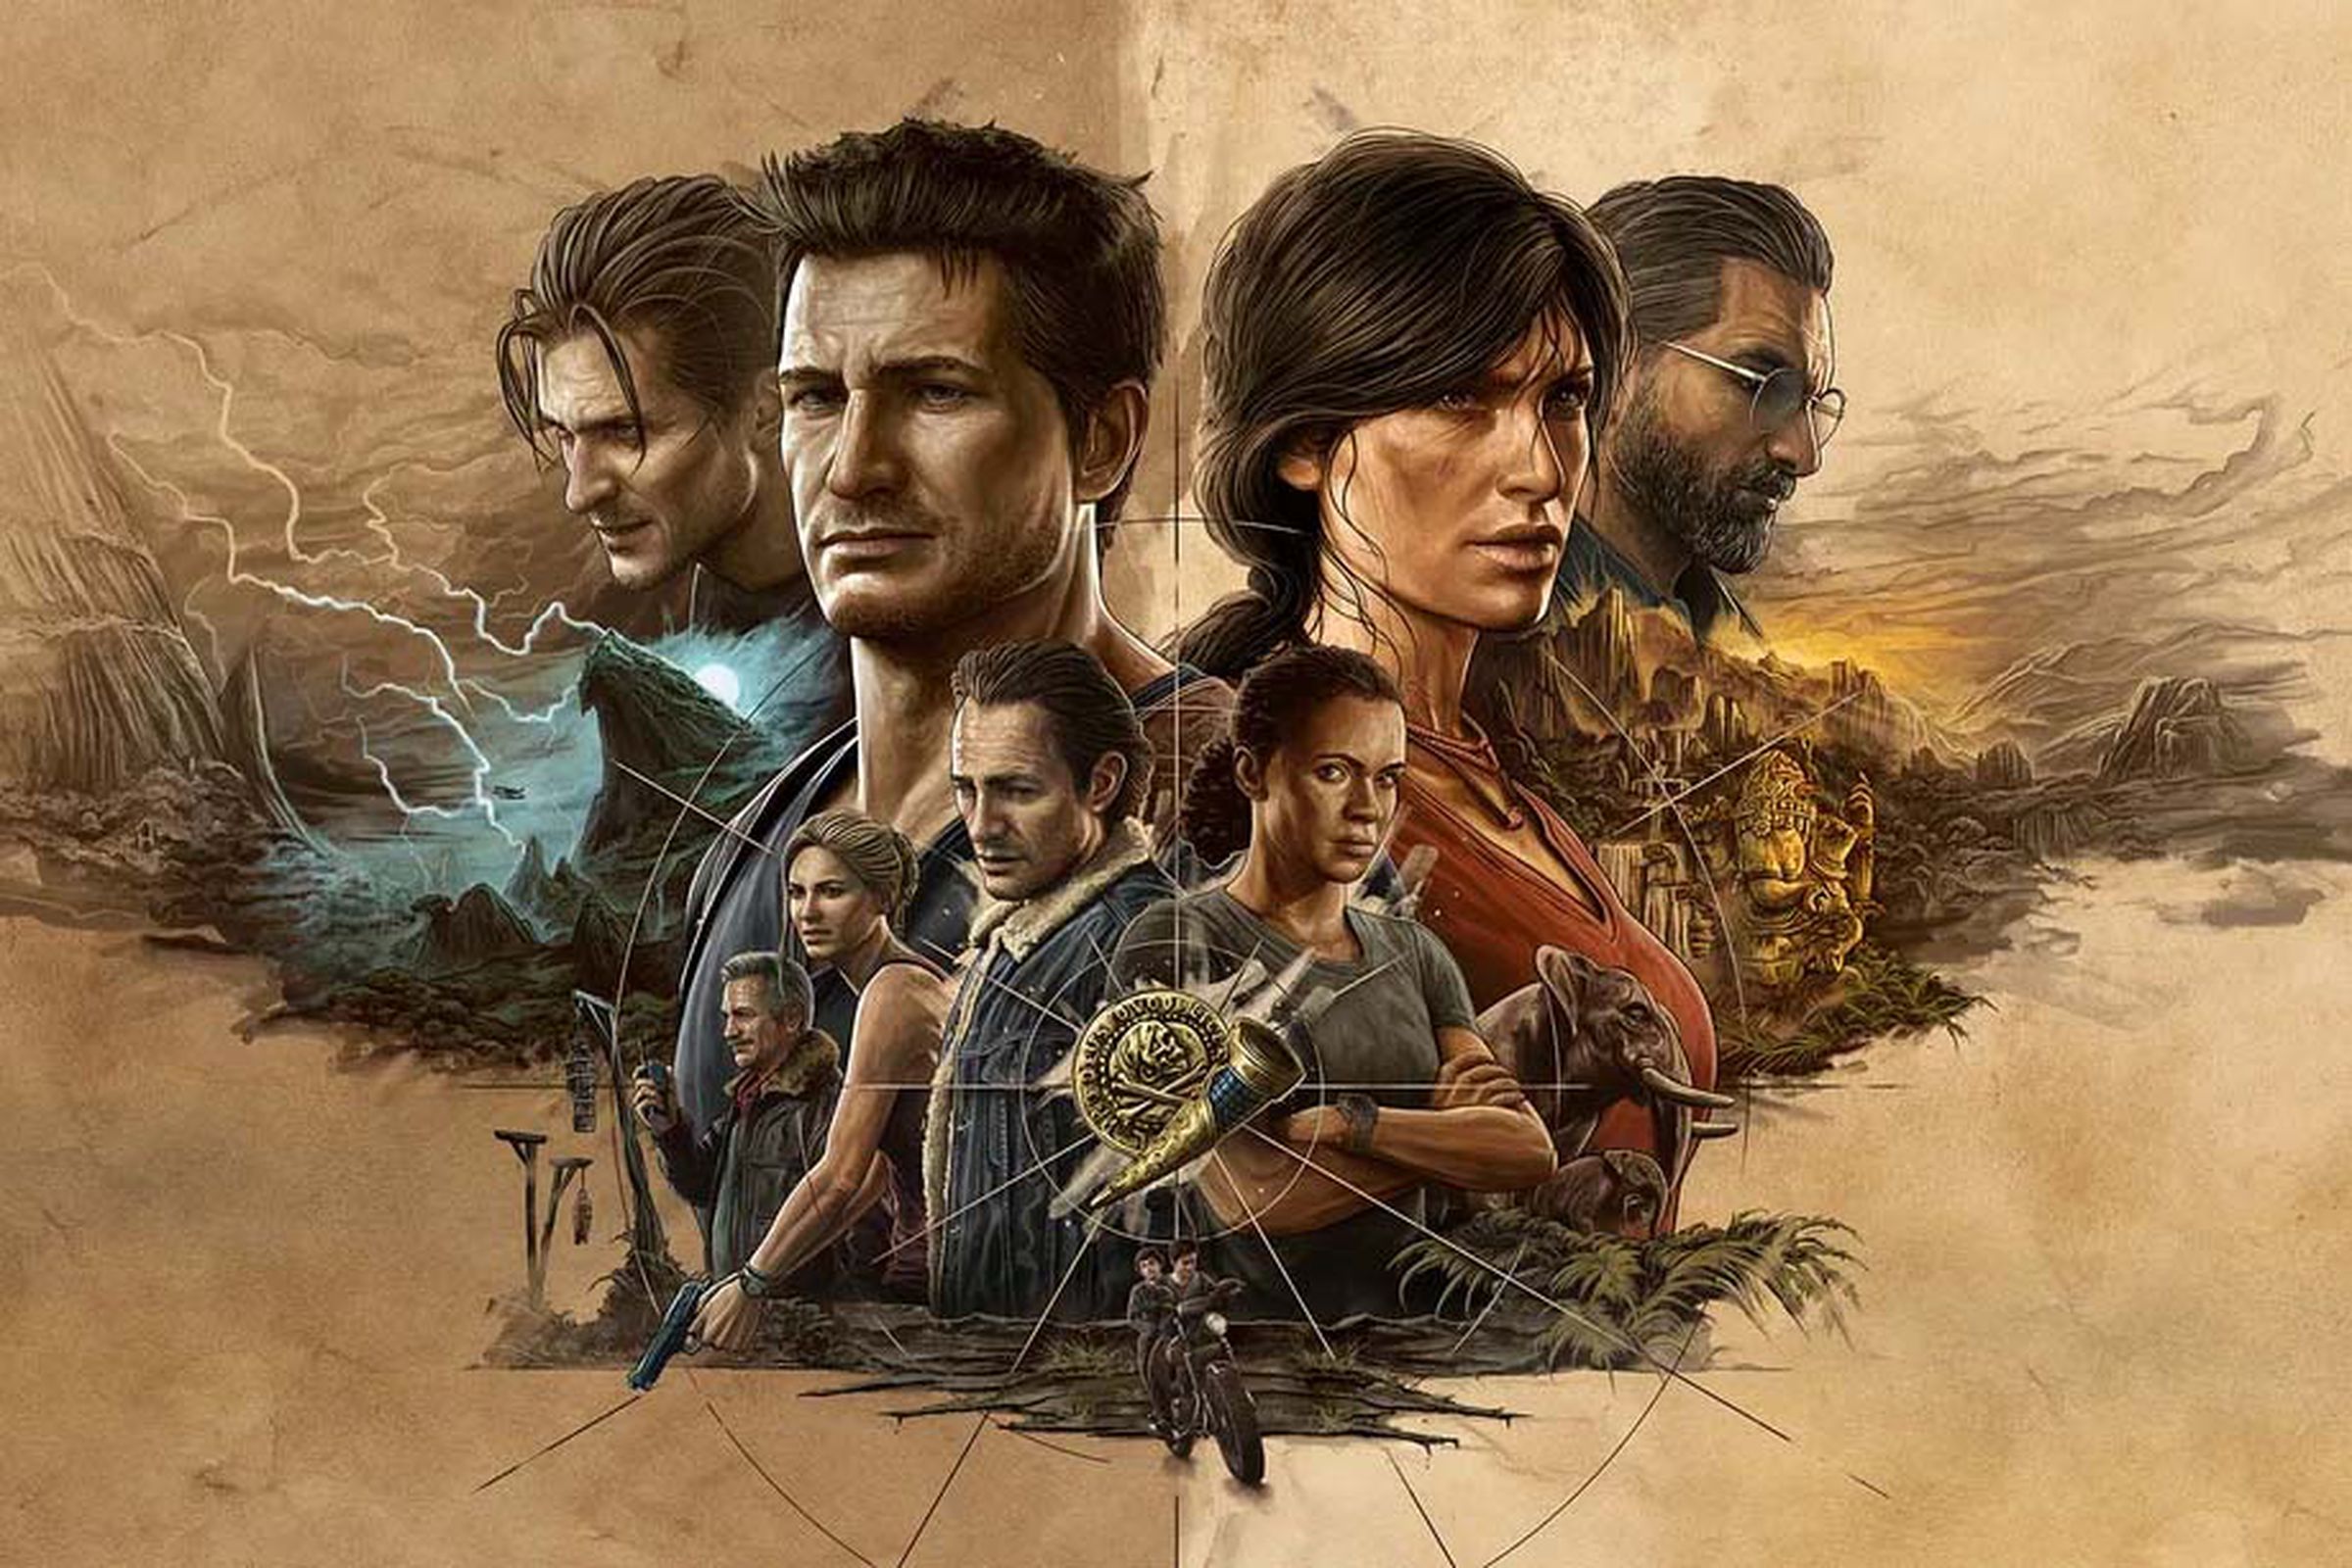 A promotional image for Uncharted: Legacy of Thieves.